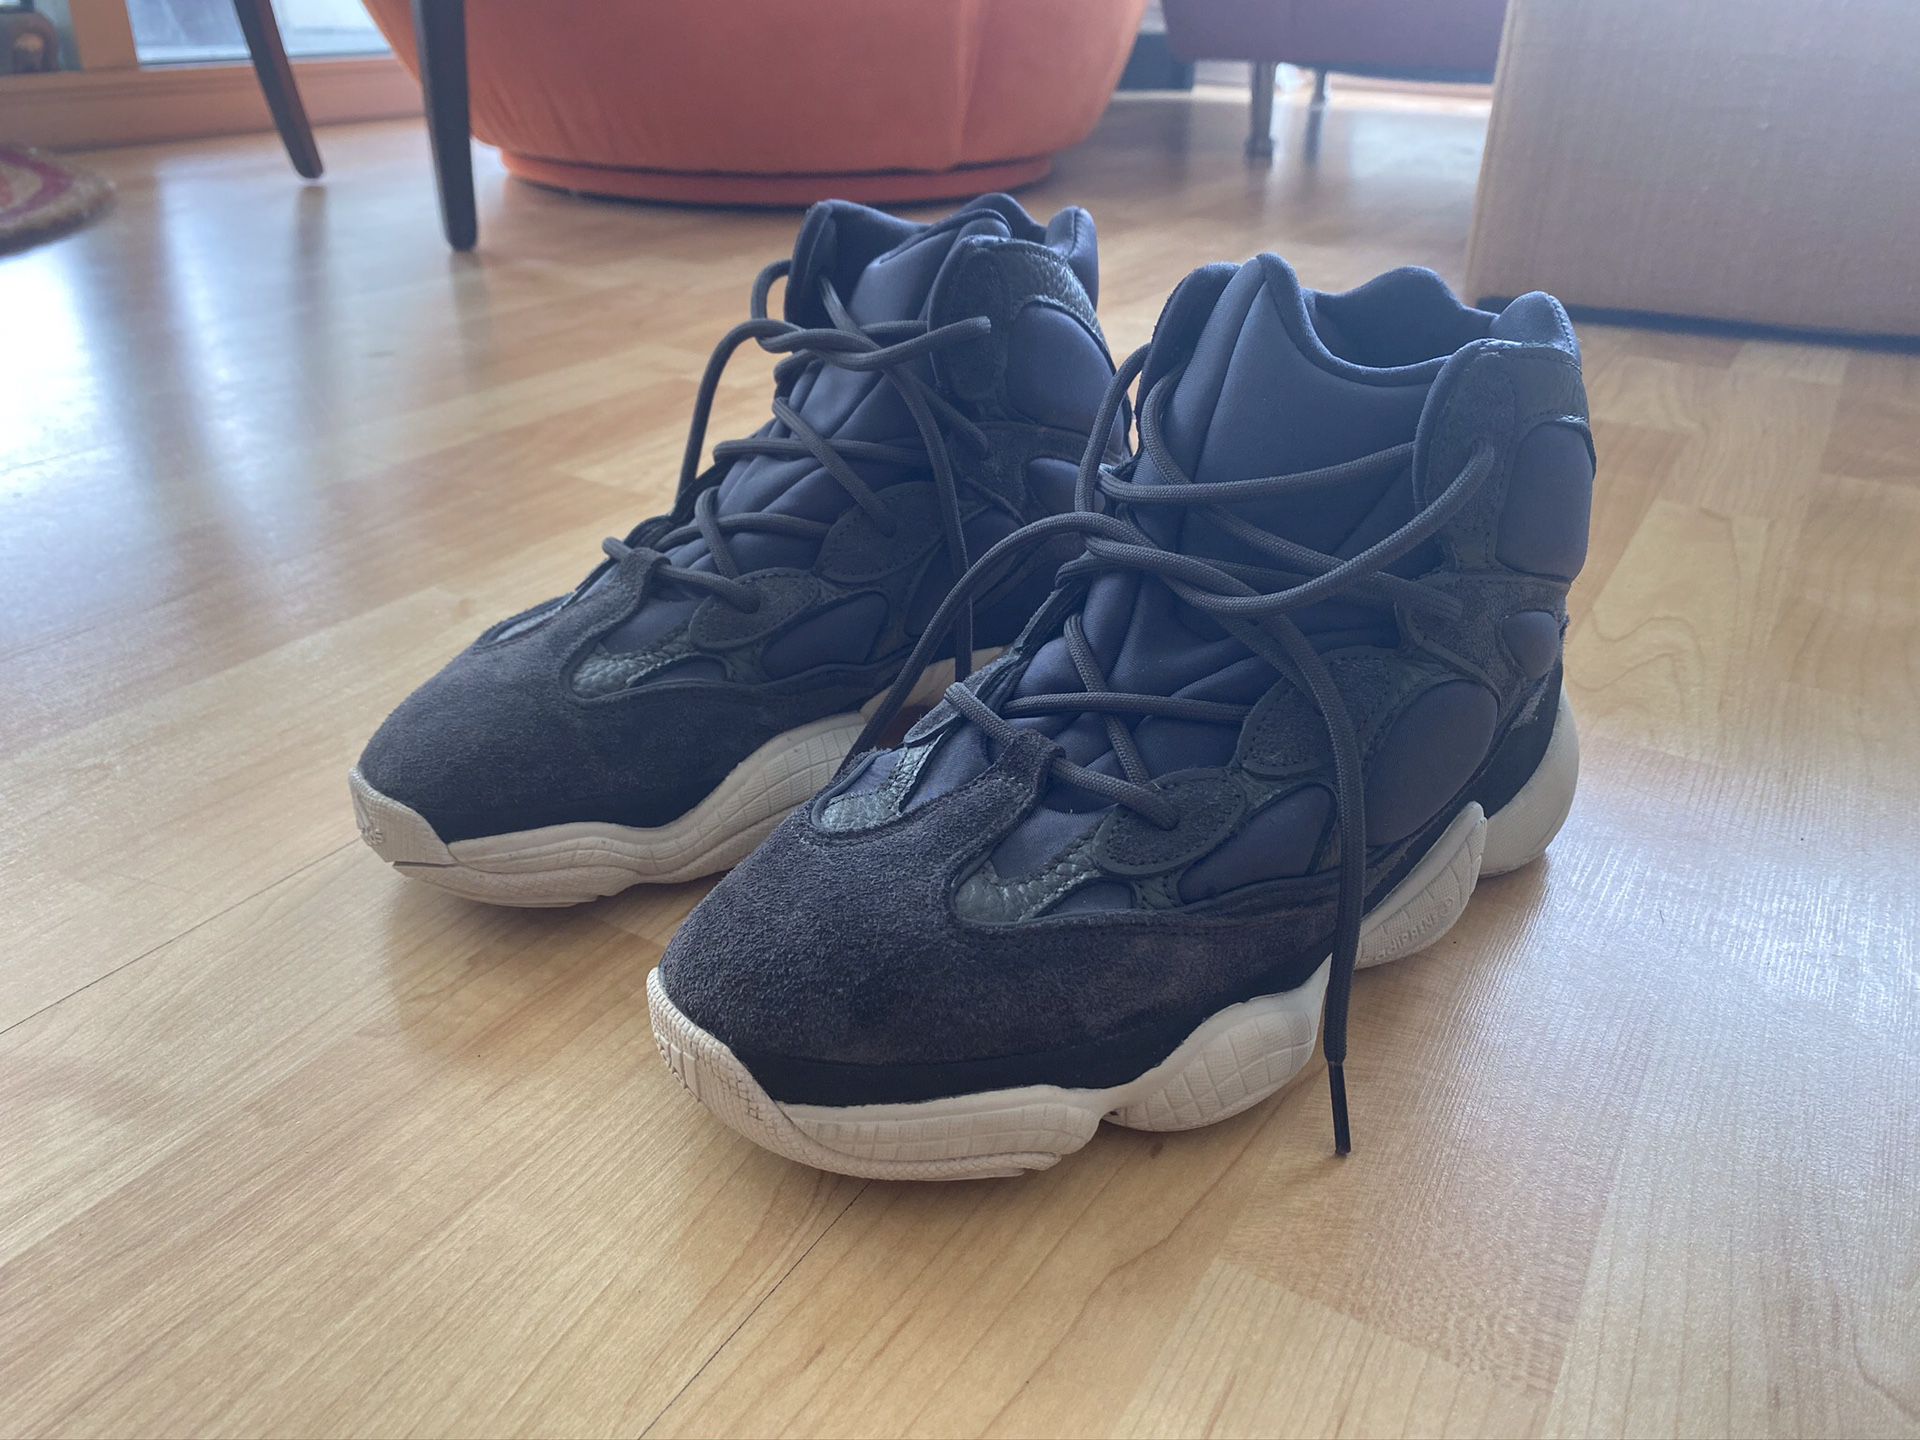 YEEZY 500 HIGH BOOTS